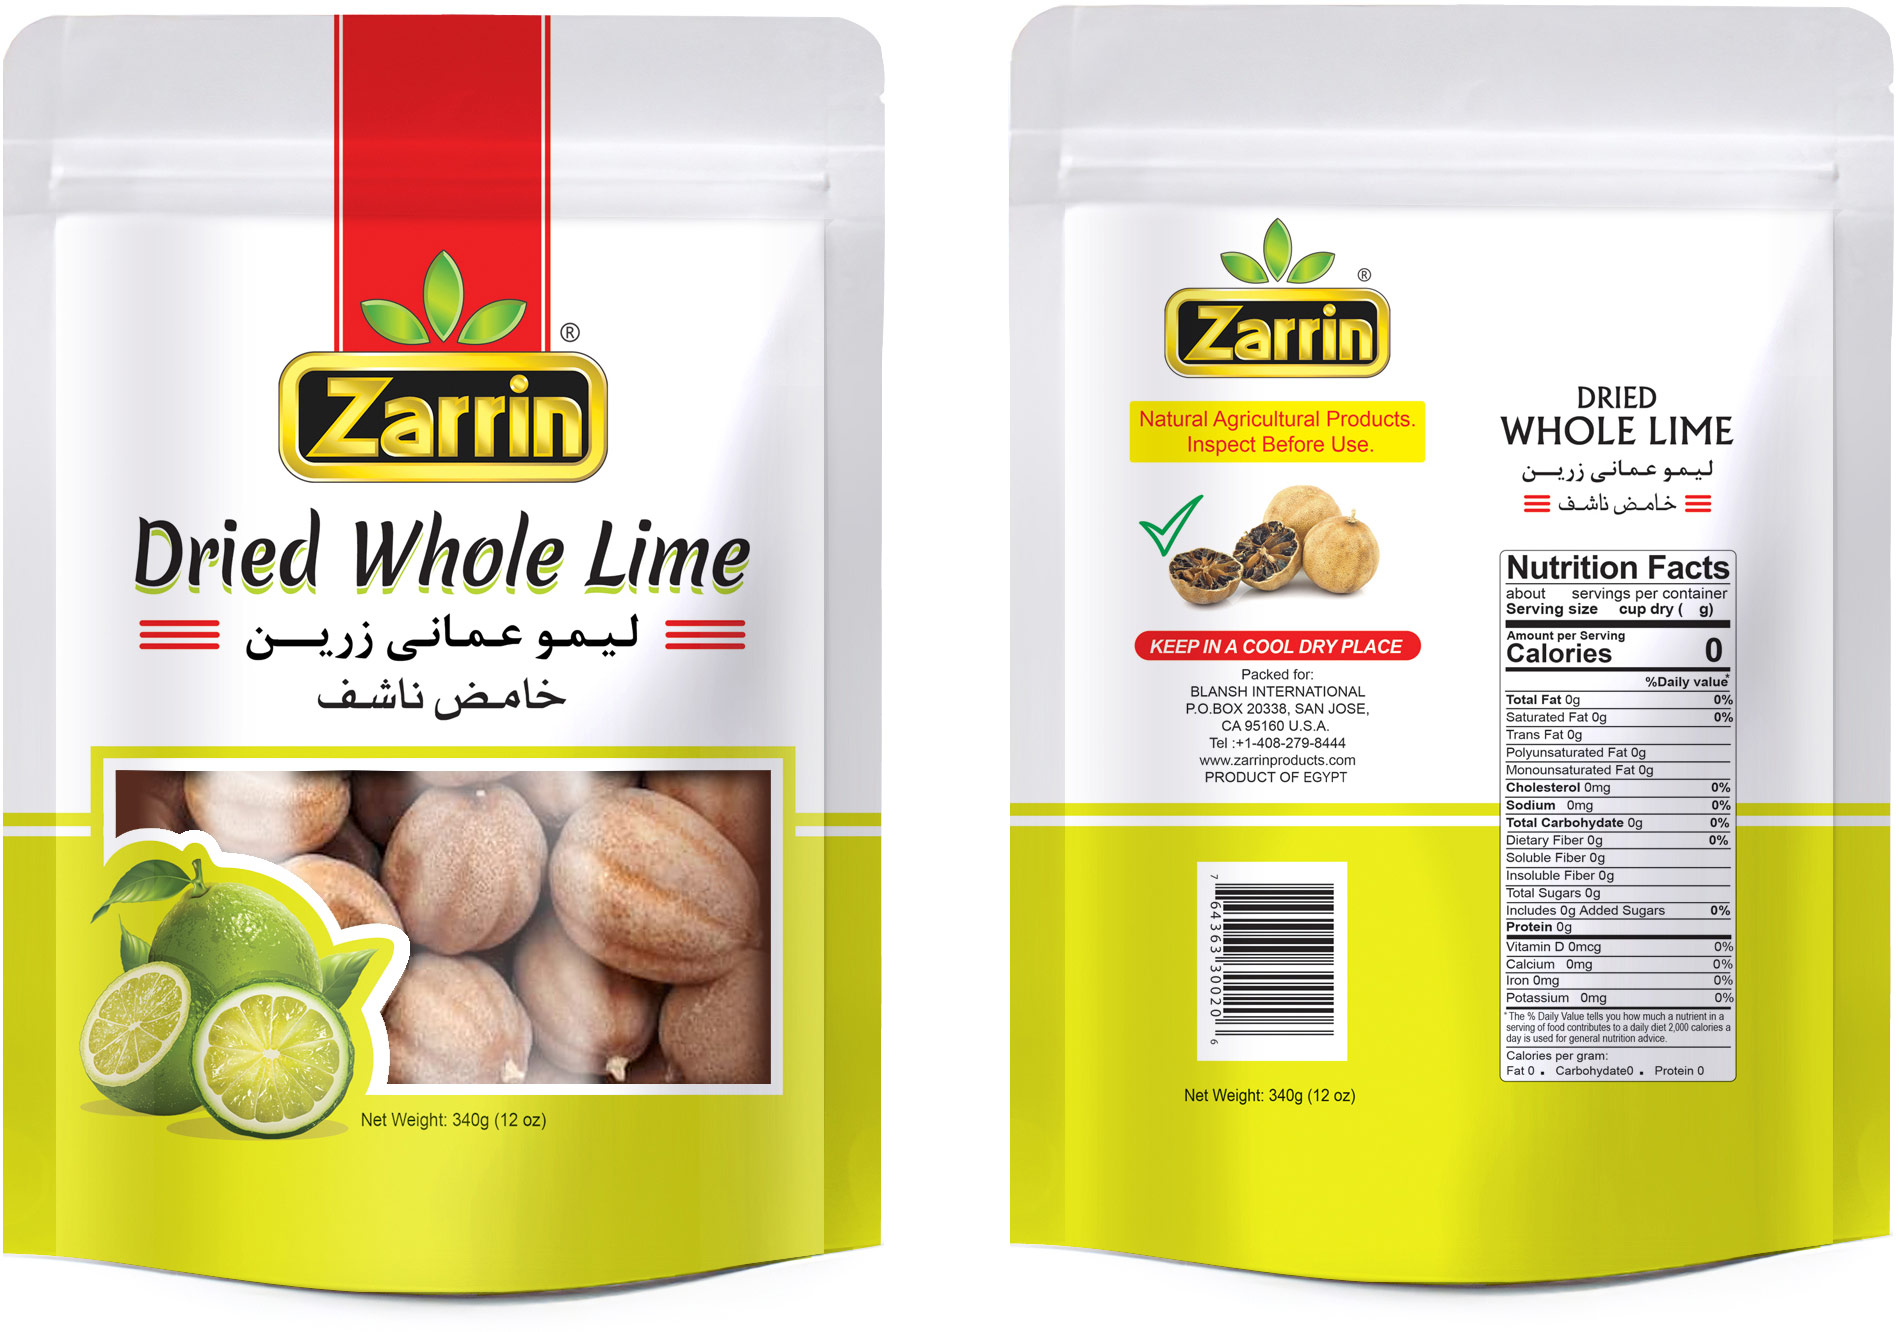 Dried Whole Lime in 340g plastic bag by Zarrin.